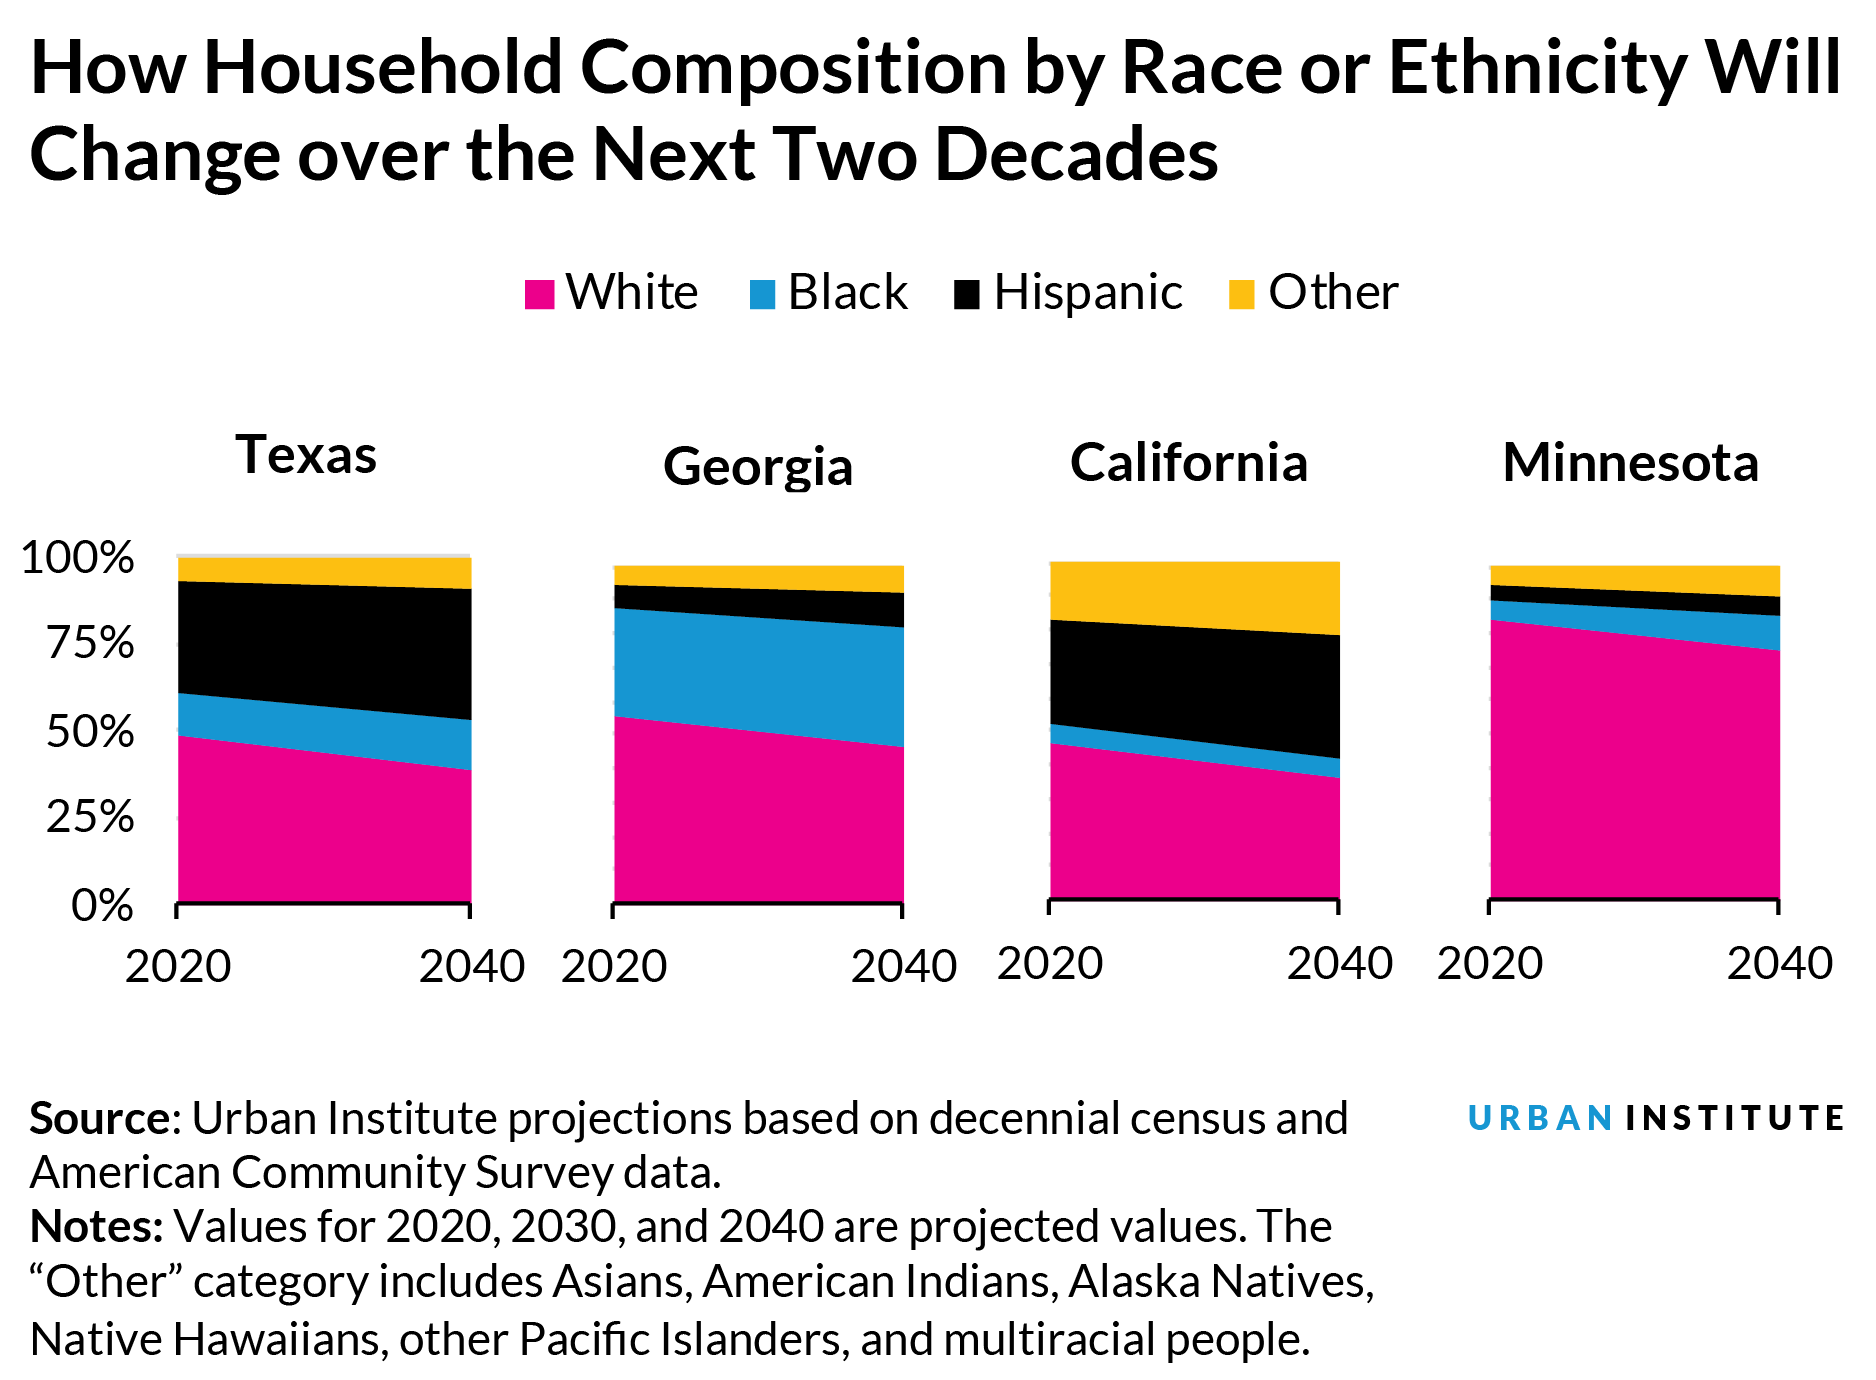 Bar chart showing how household composition by race or ethnicity will change over the next two decades in California, Georgia, California, and Minnesota